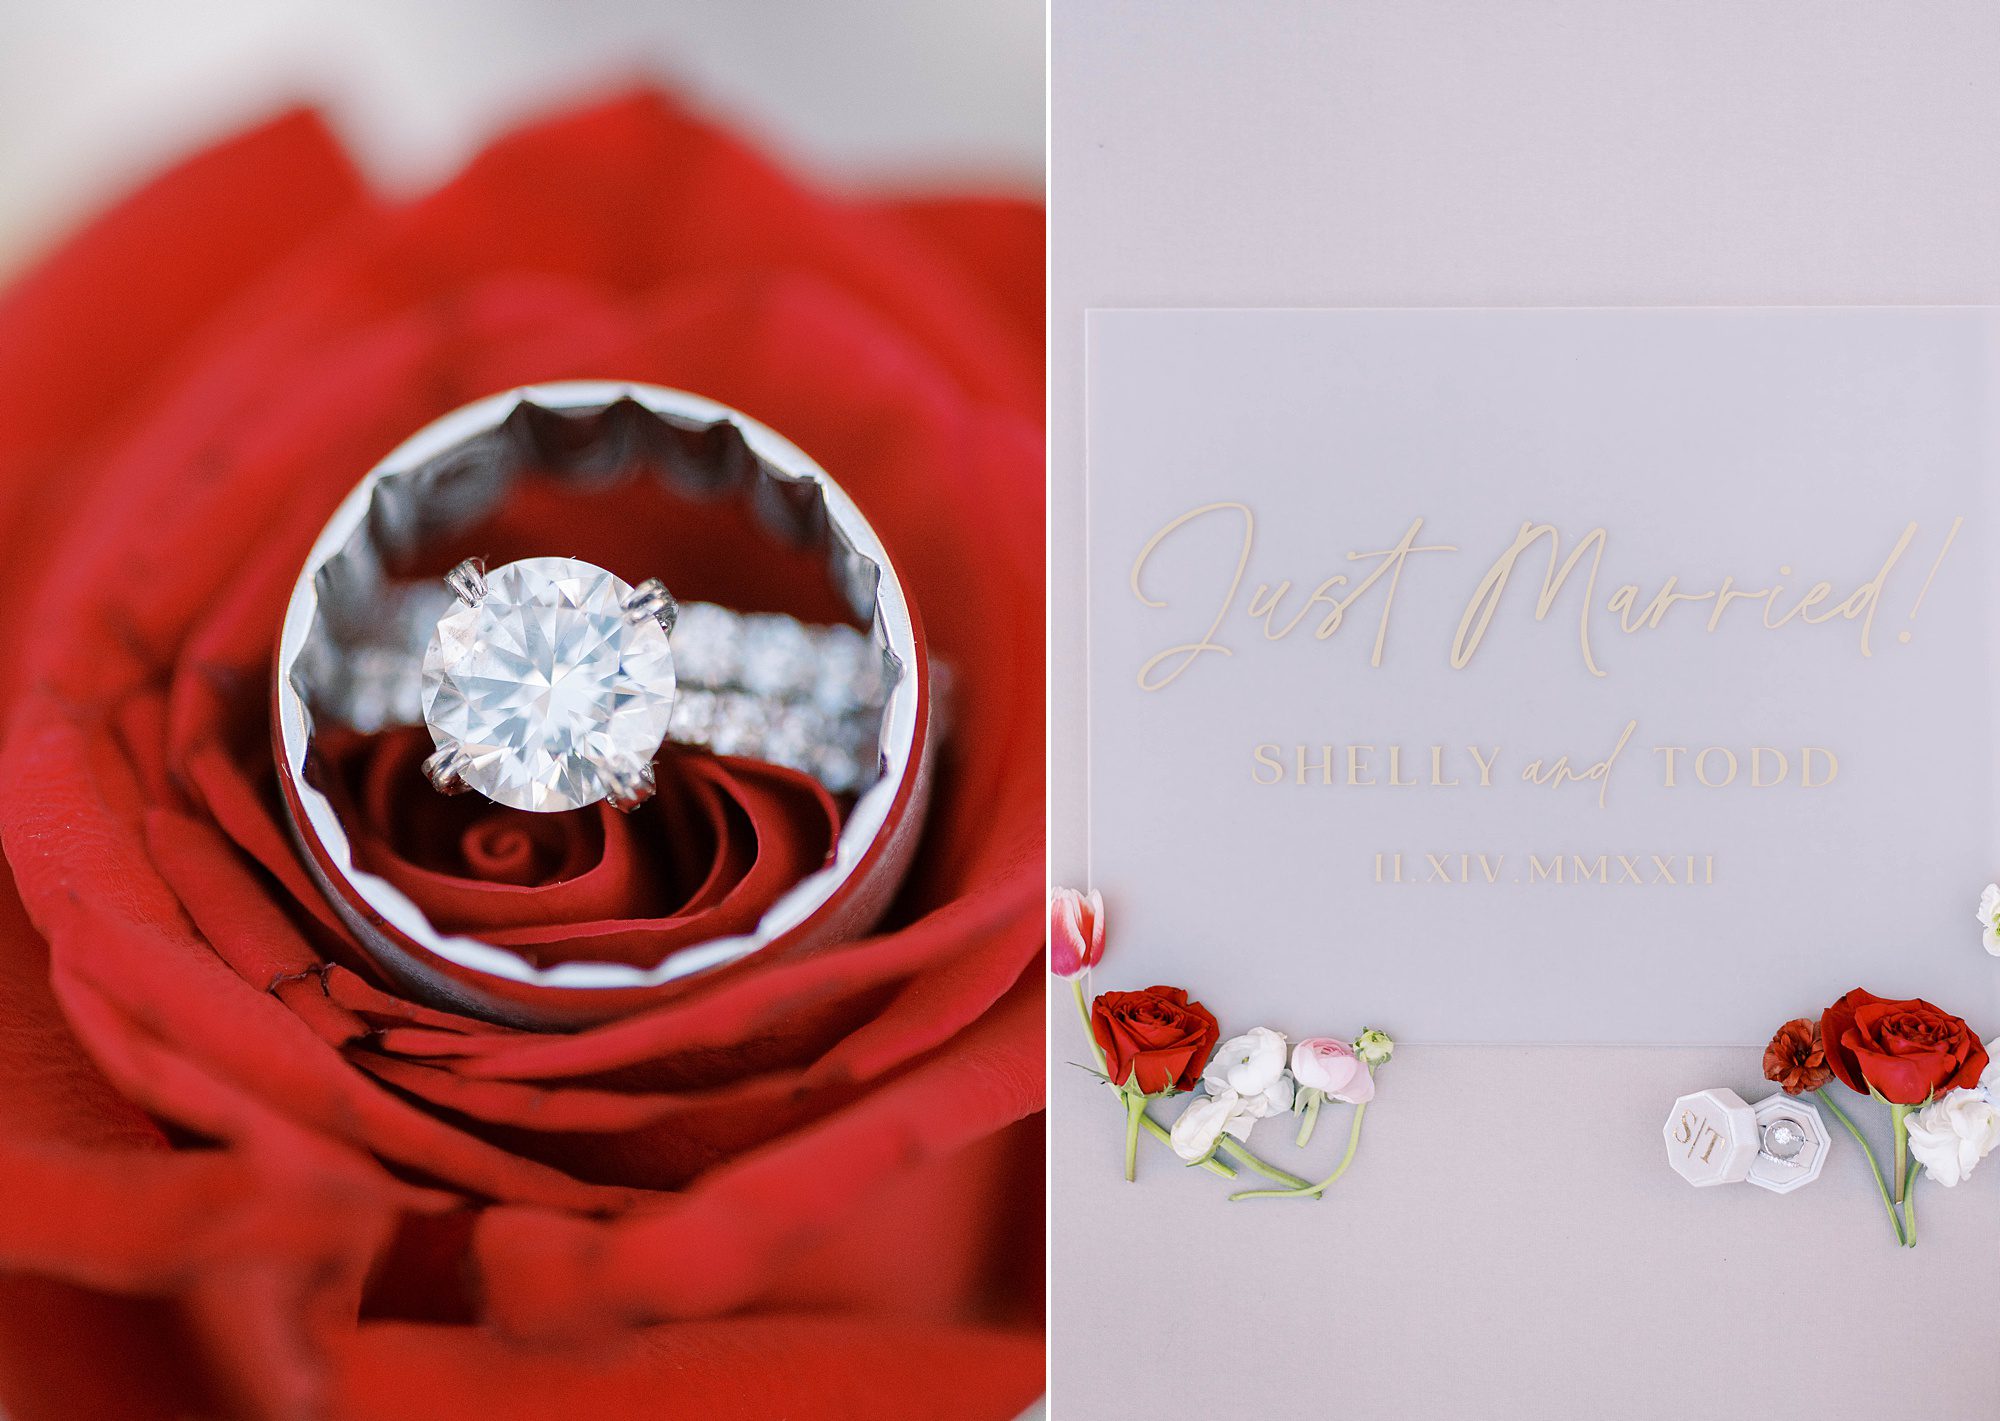 wedding ring rests on red rose before Downtown Tampa wedding